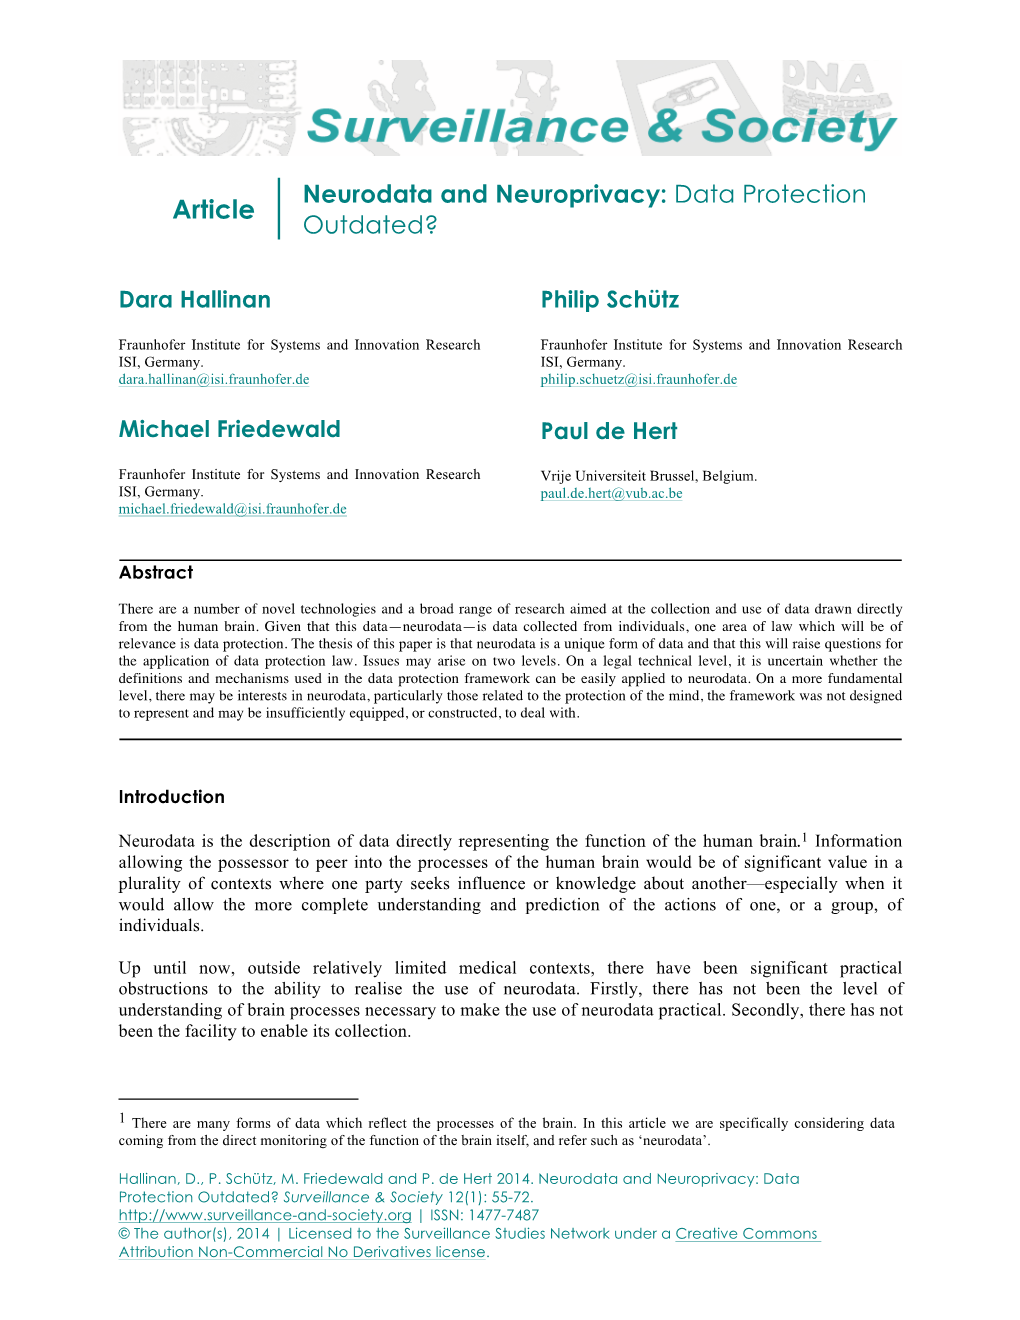 Neurodata and Neuroprivacy: Data Protection Article Outdated?